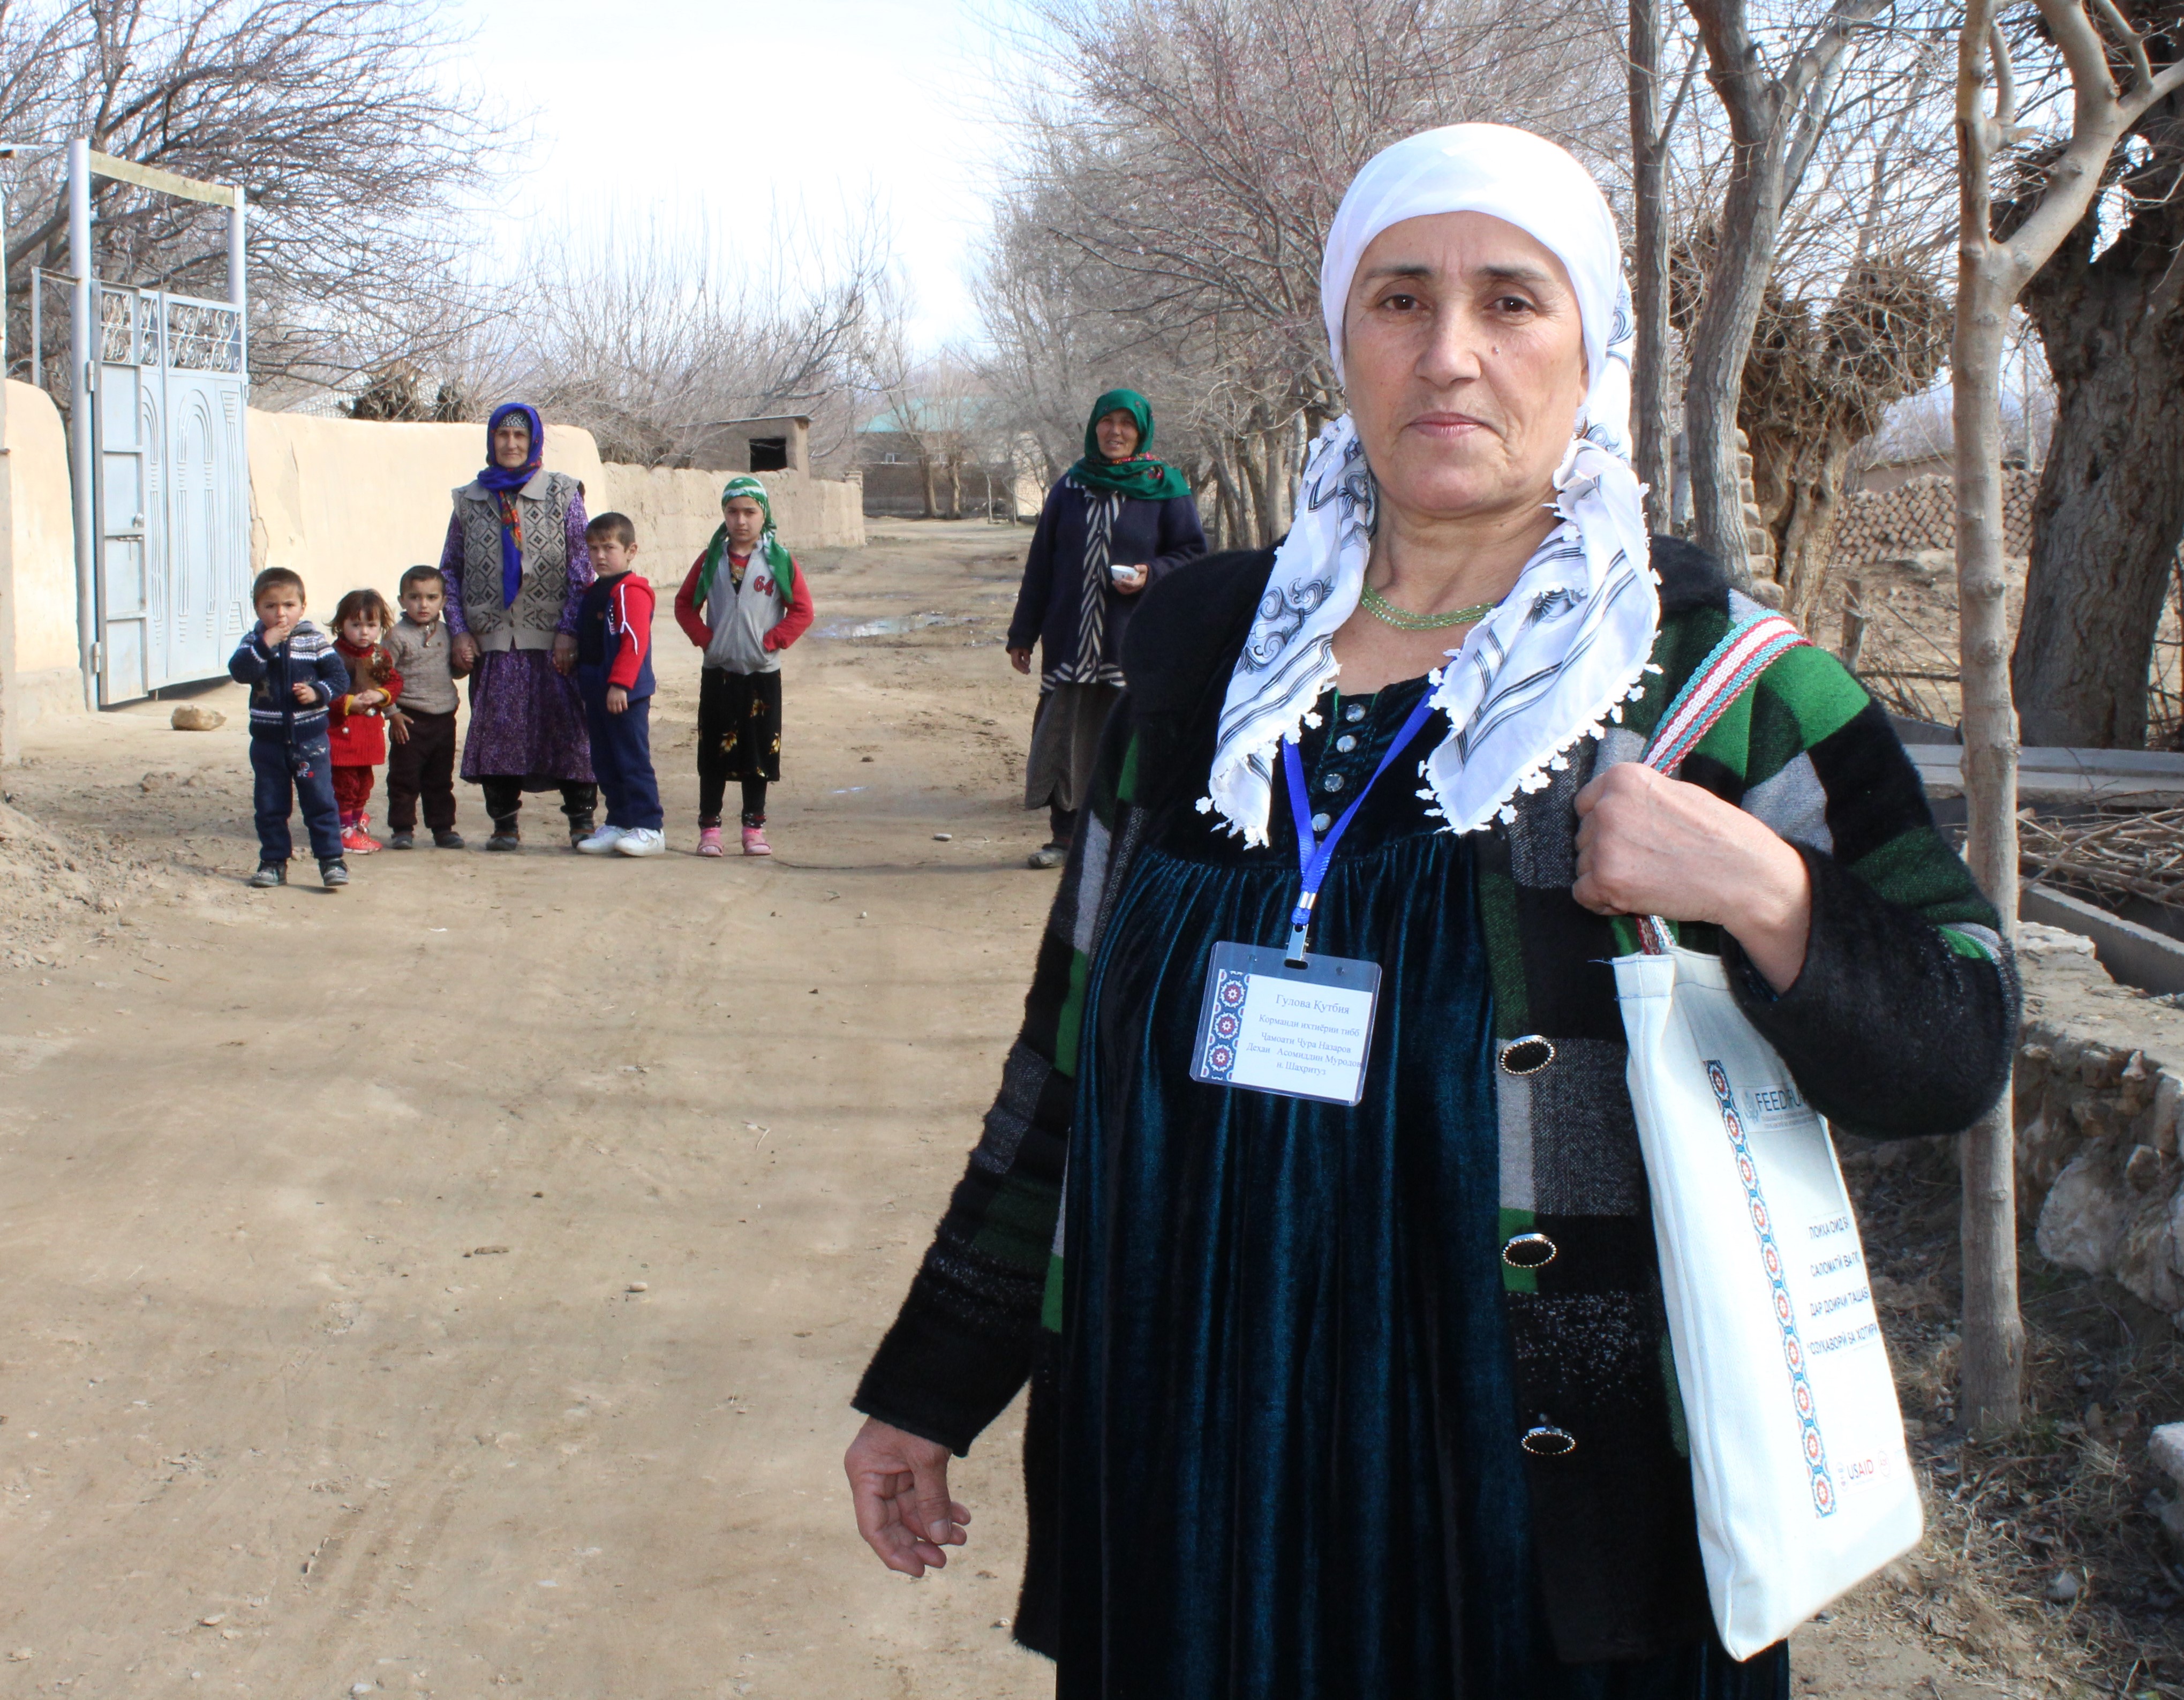 Thousands of people in Khatlon region now have greater access to health services and sanitation, thanks to the work of community health volunteers. Photo by Khosiyatkhon Komilova for IntraHealth International.
